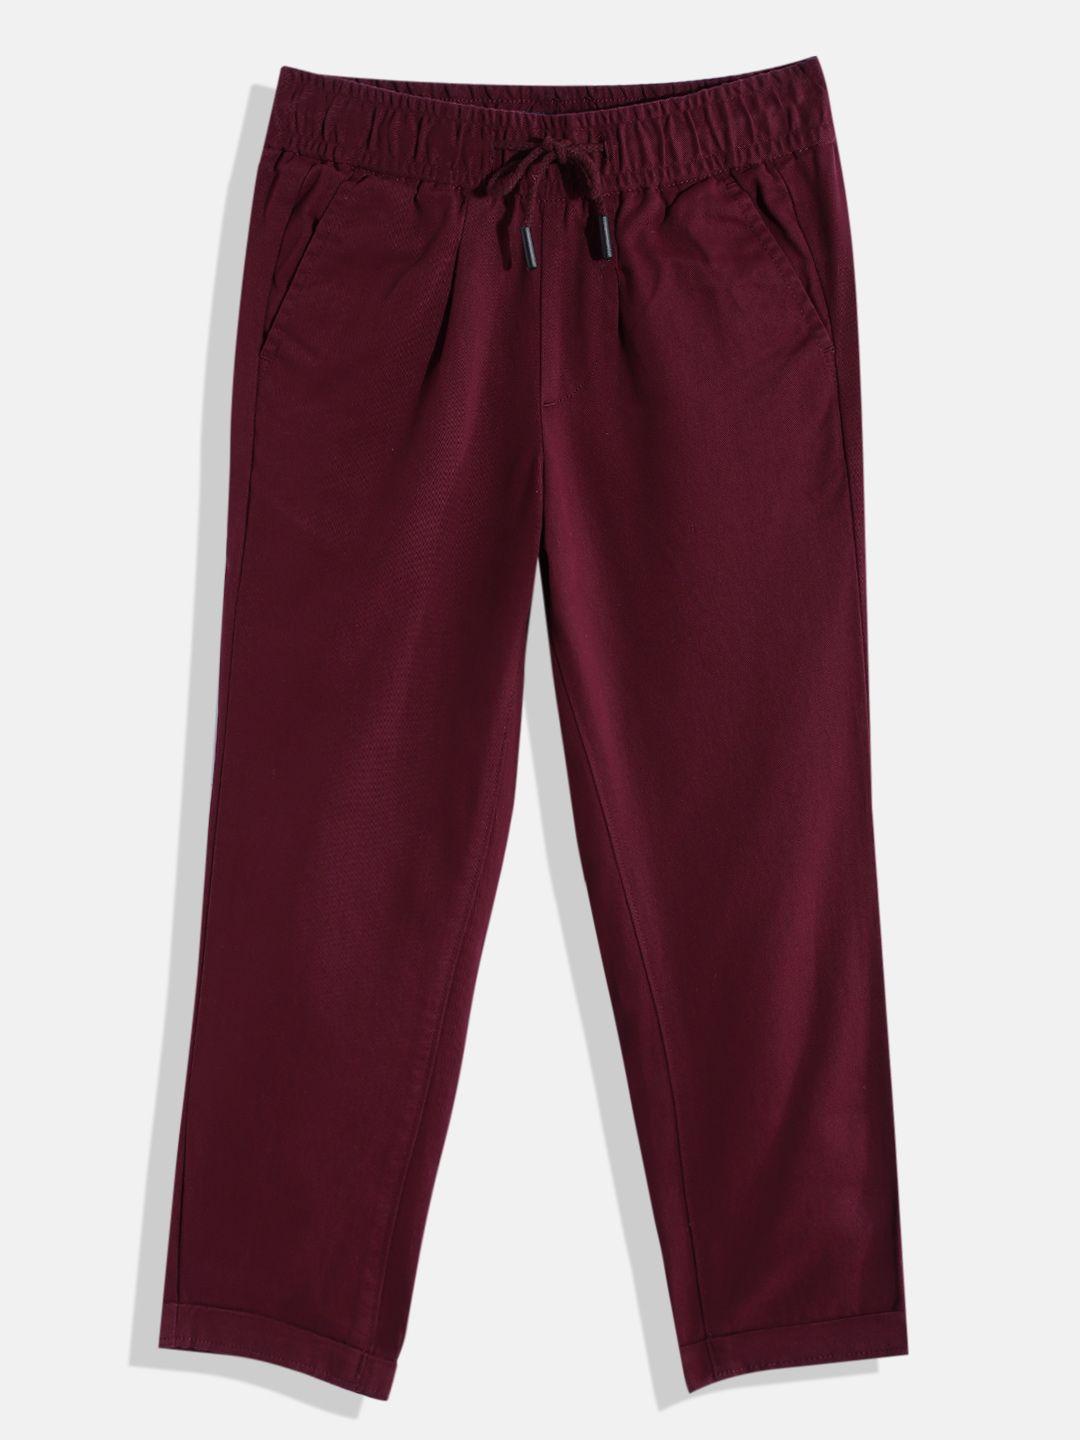 m&h-juniors-boys-maroon-pure-cotton-solid-trousers